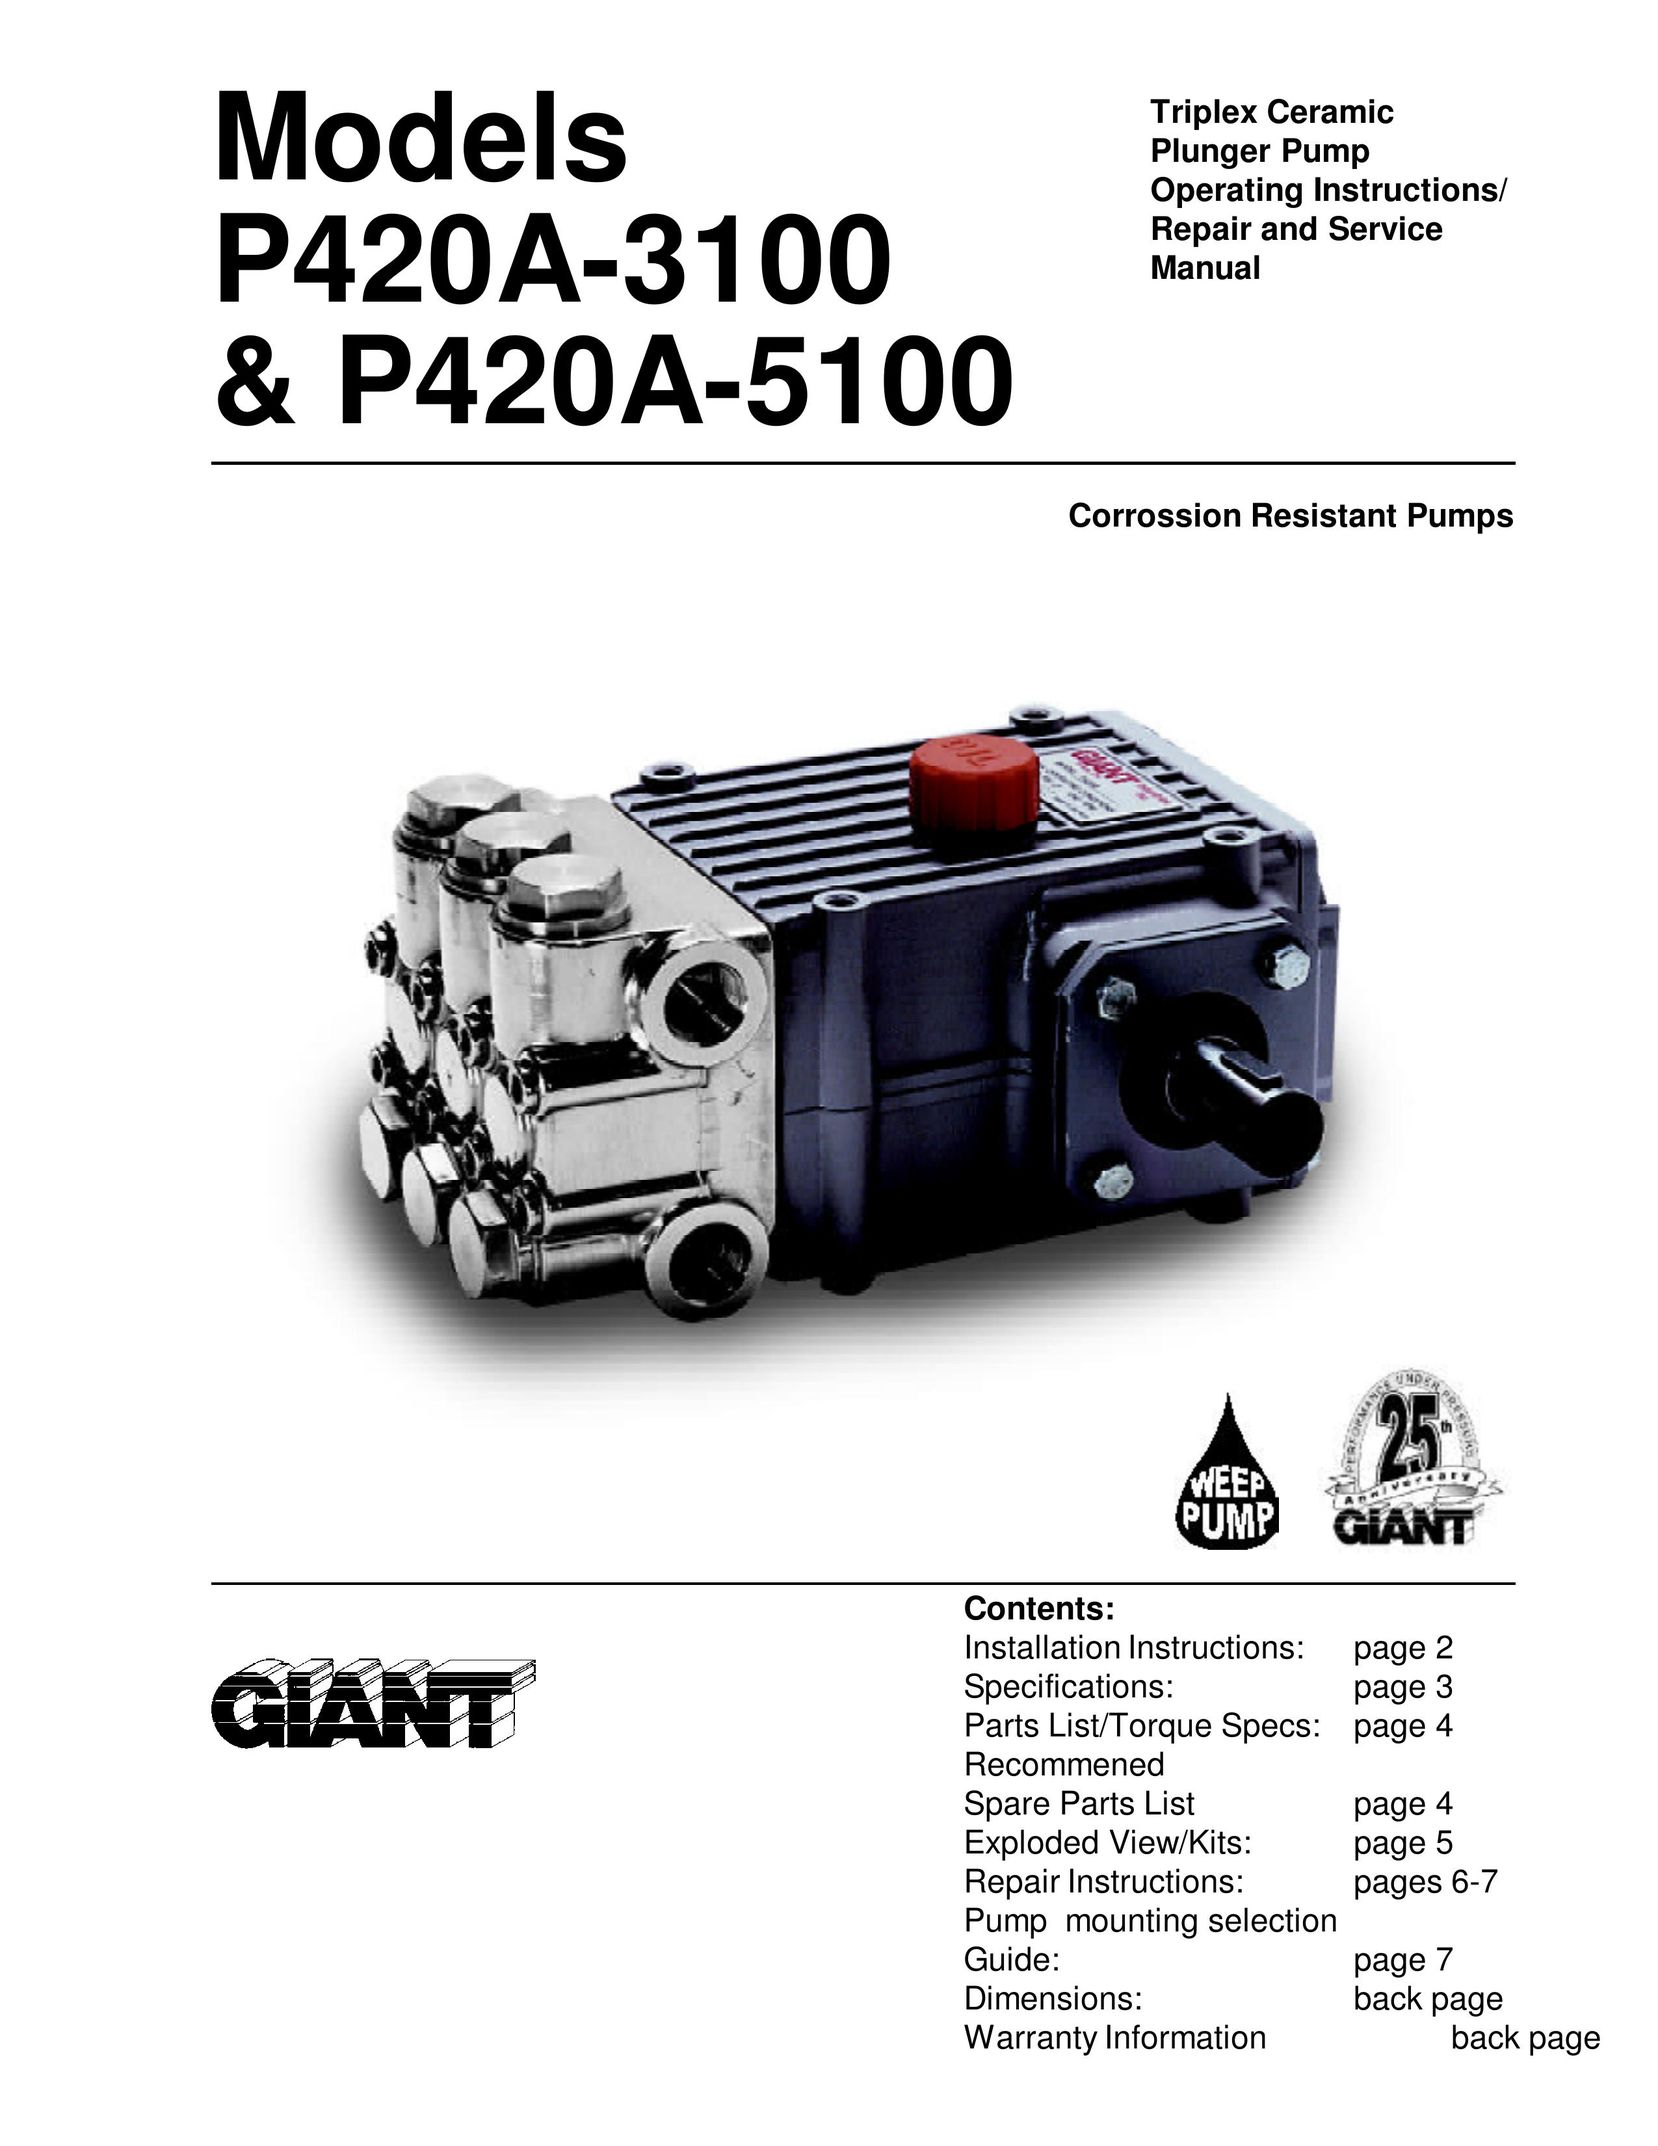 Giant P420A-3100 Septic System User Manual